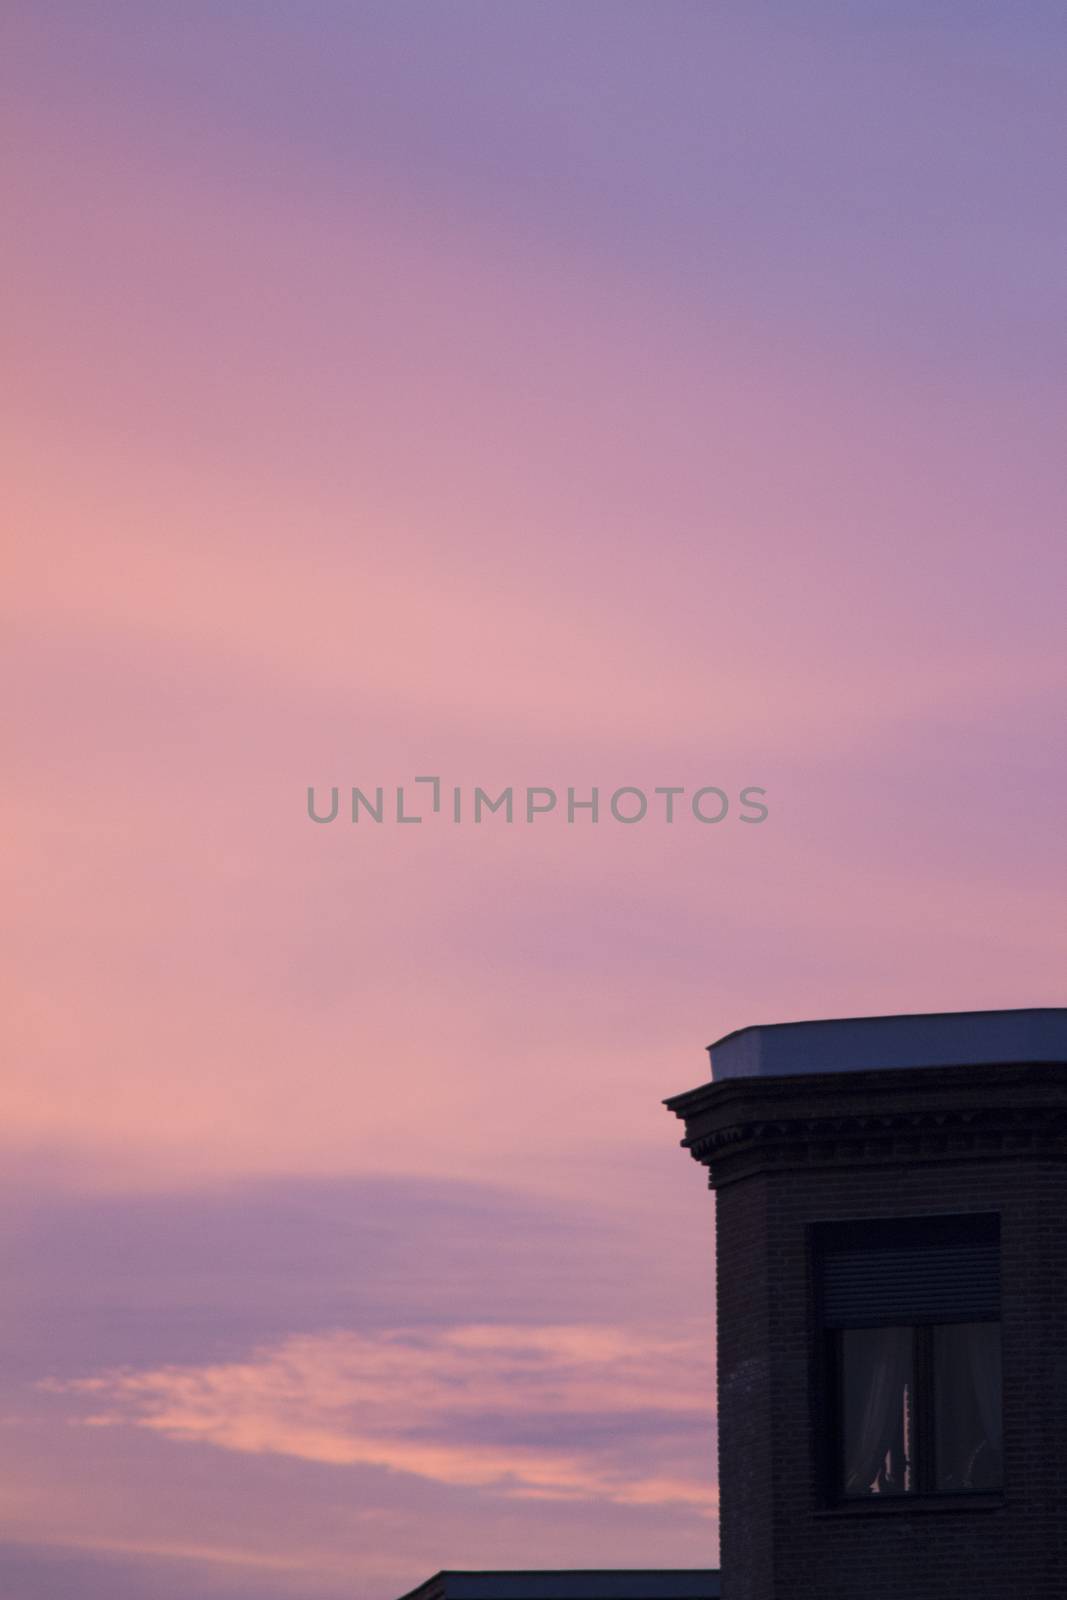 City building roof silhouette and dusk sunset sky by edwardolive